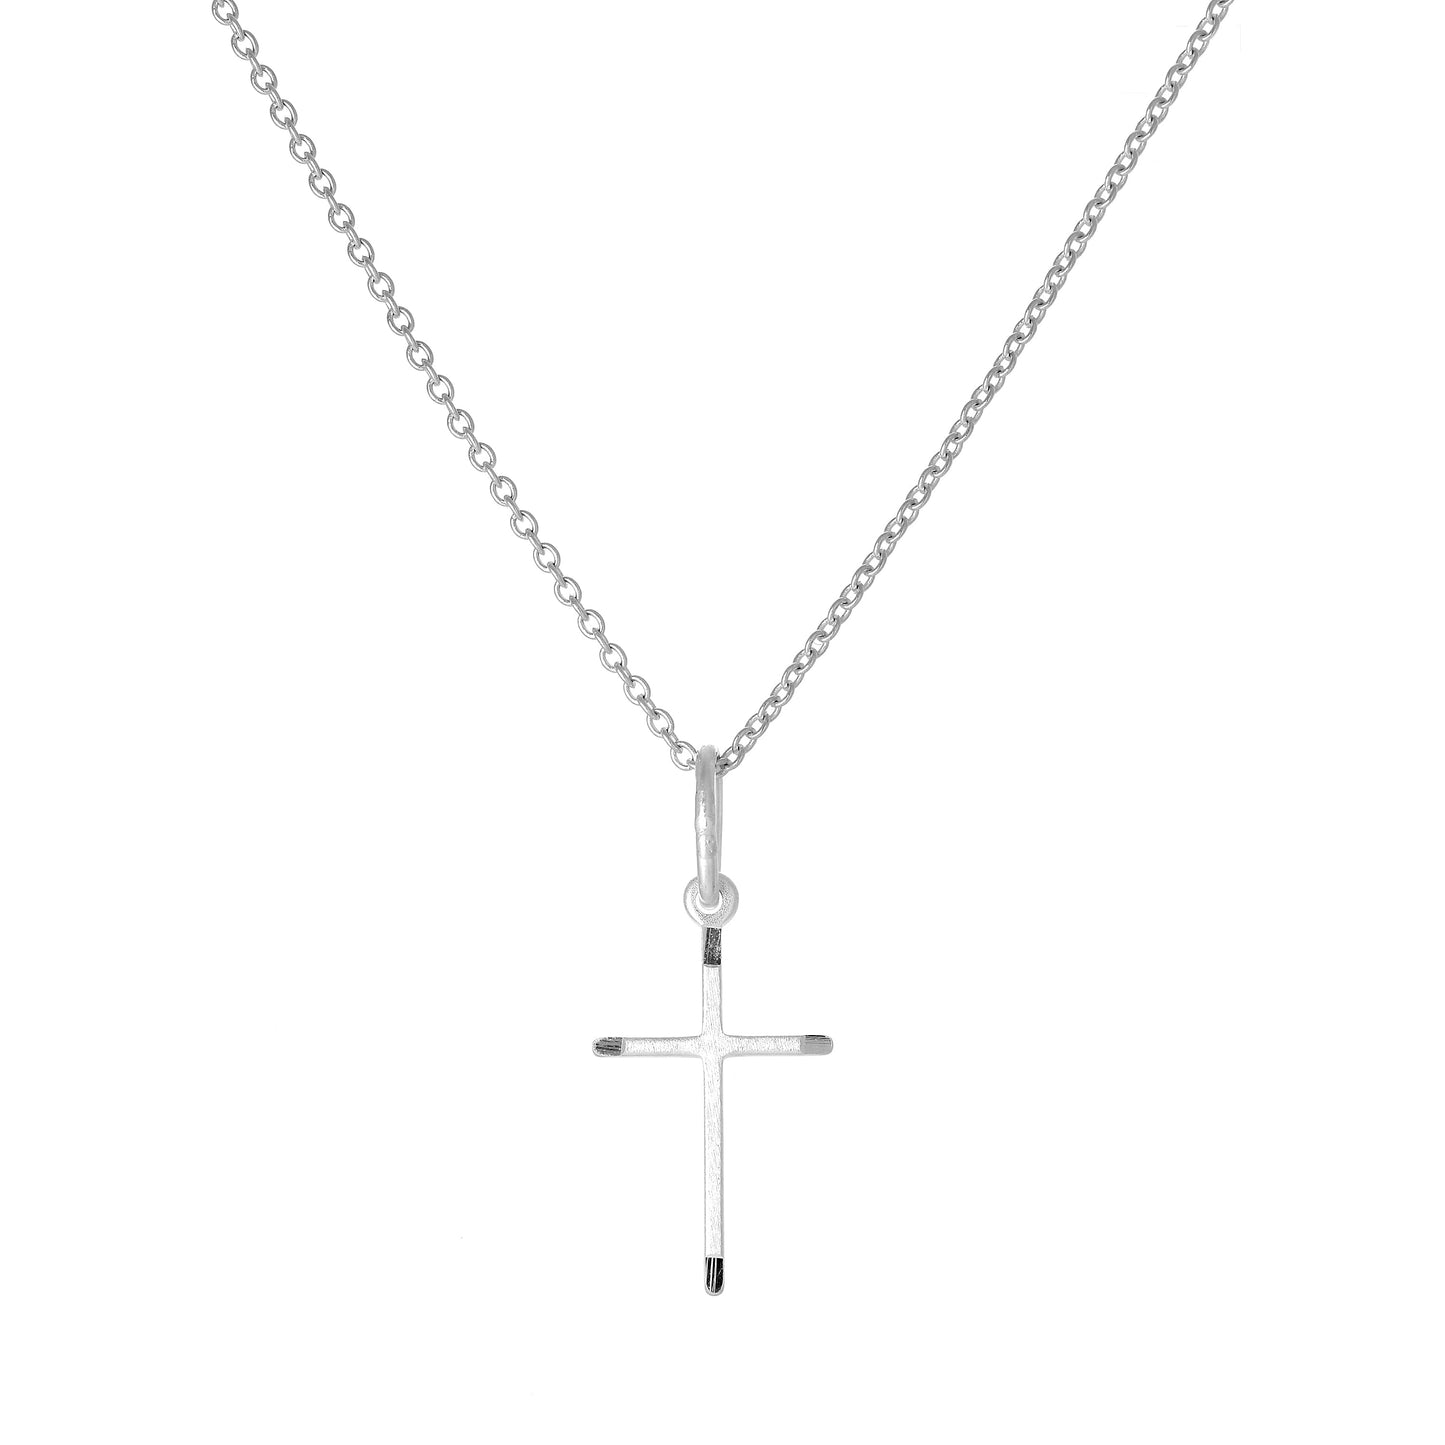 Sterling Silver Matt & Polished Cross Pendant Necklace 16 - 22 Inches